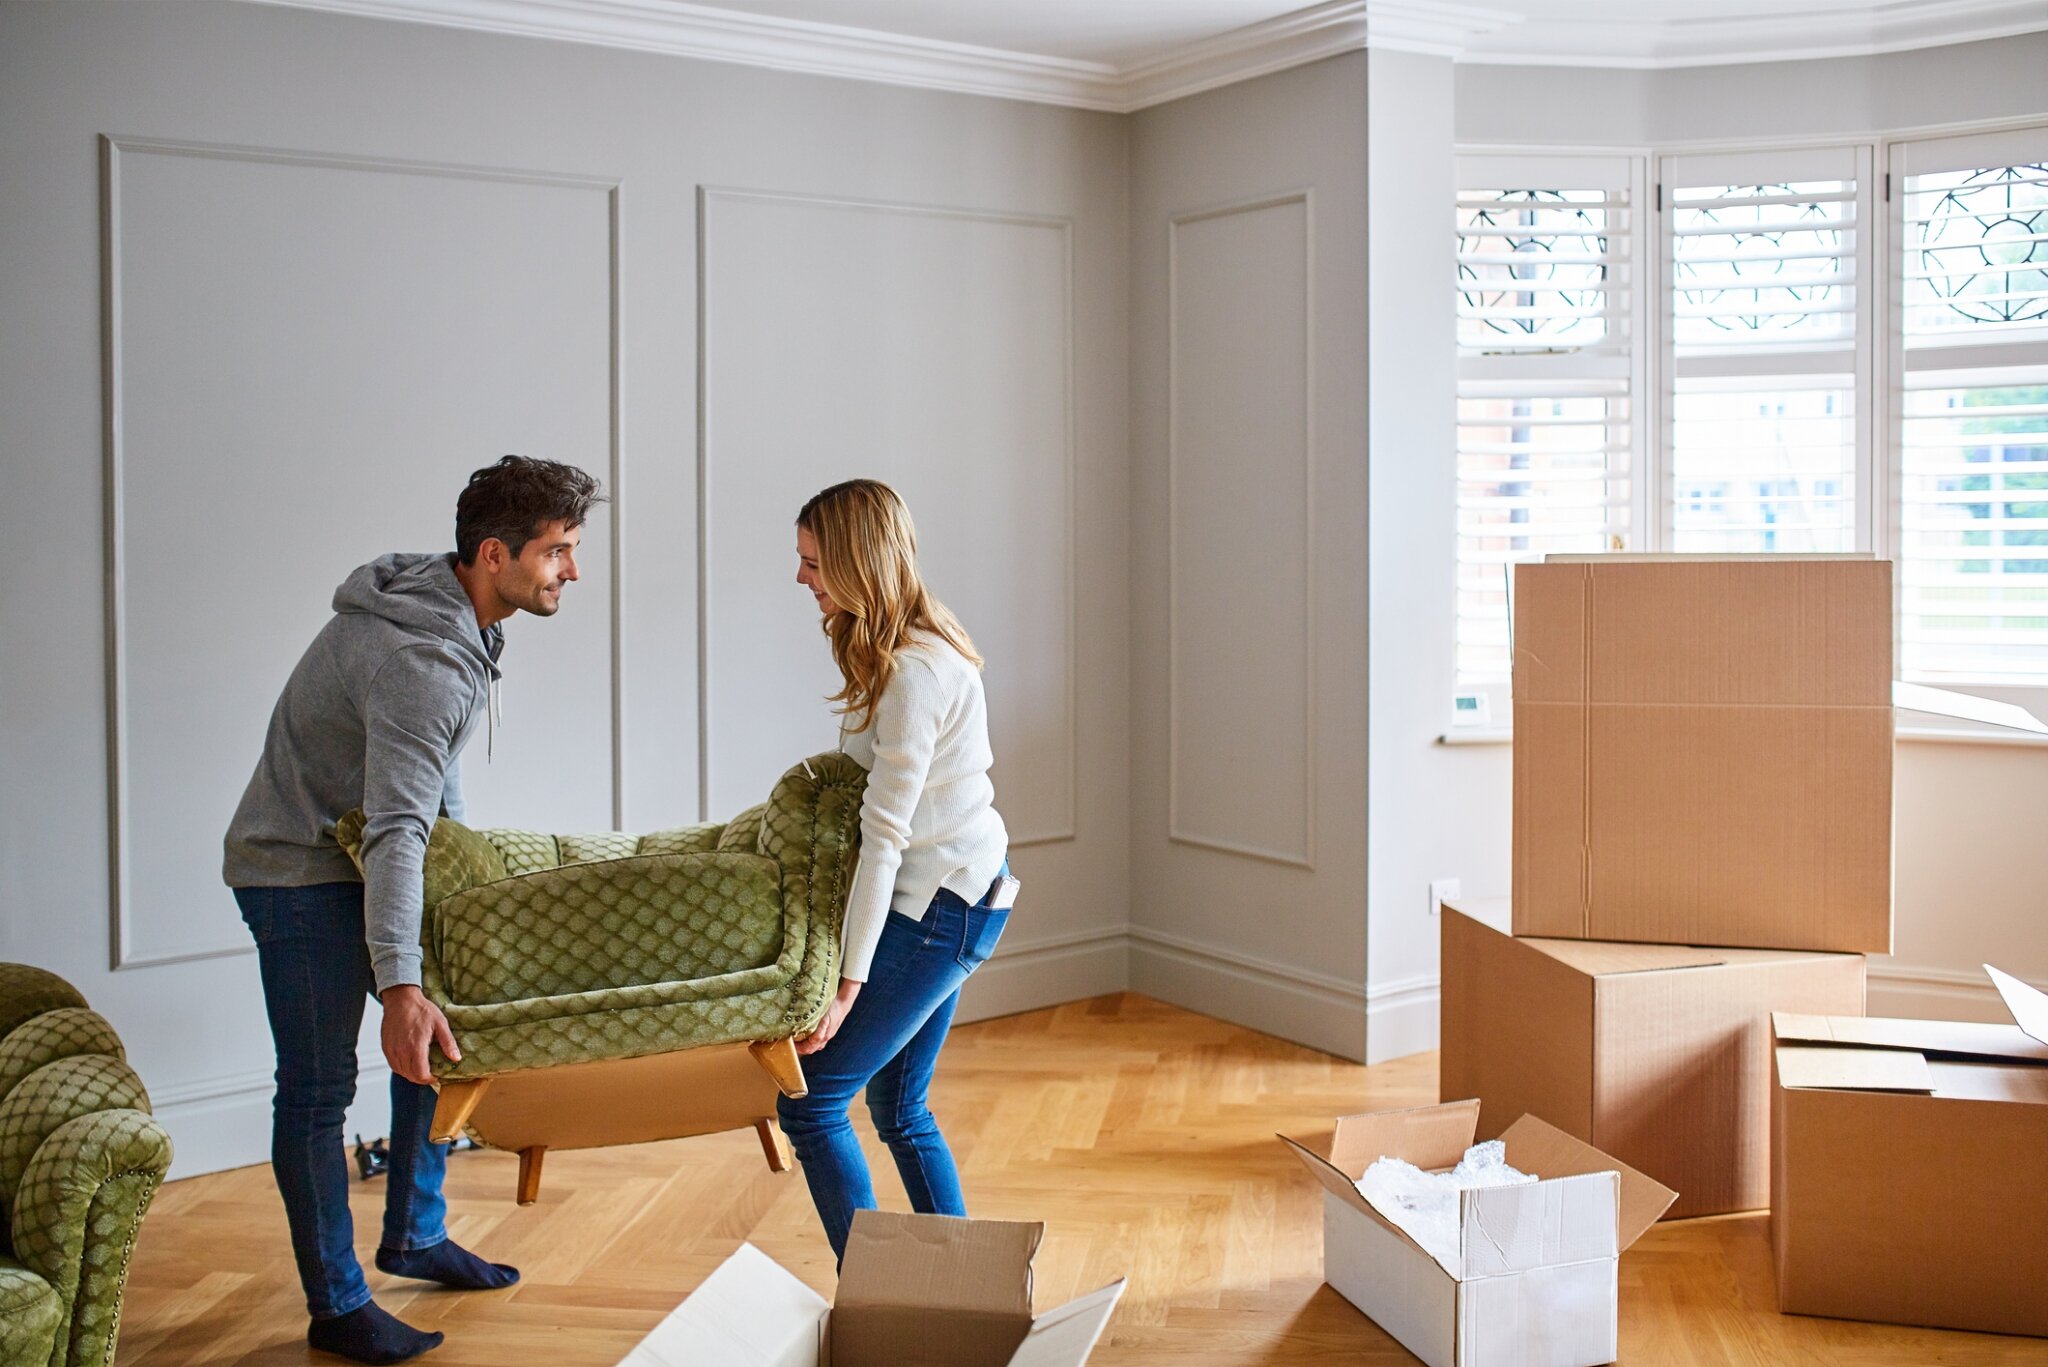 Tips for Renting an Apartment